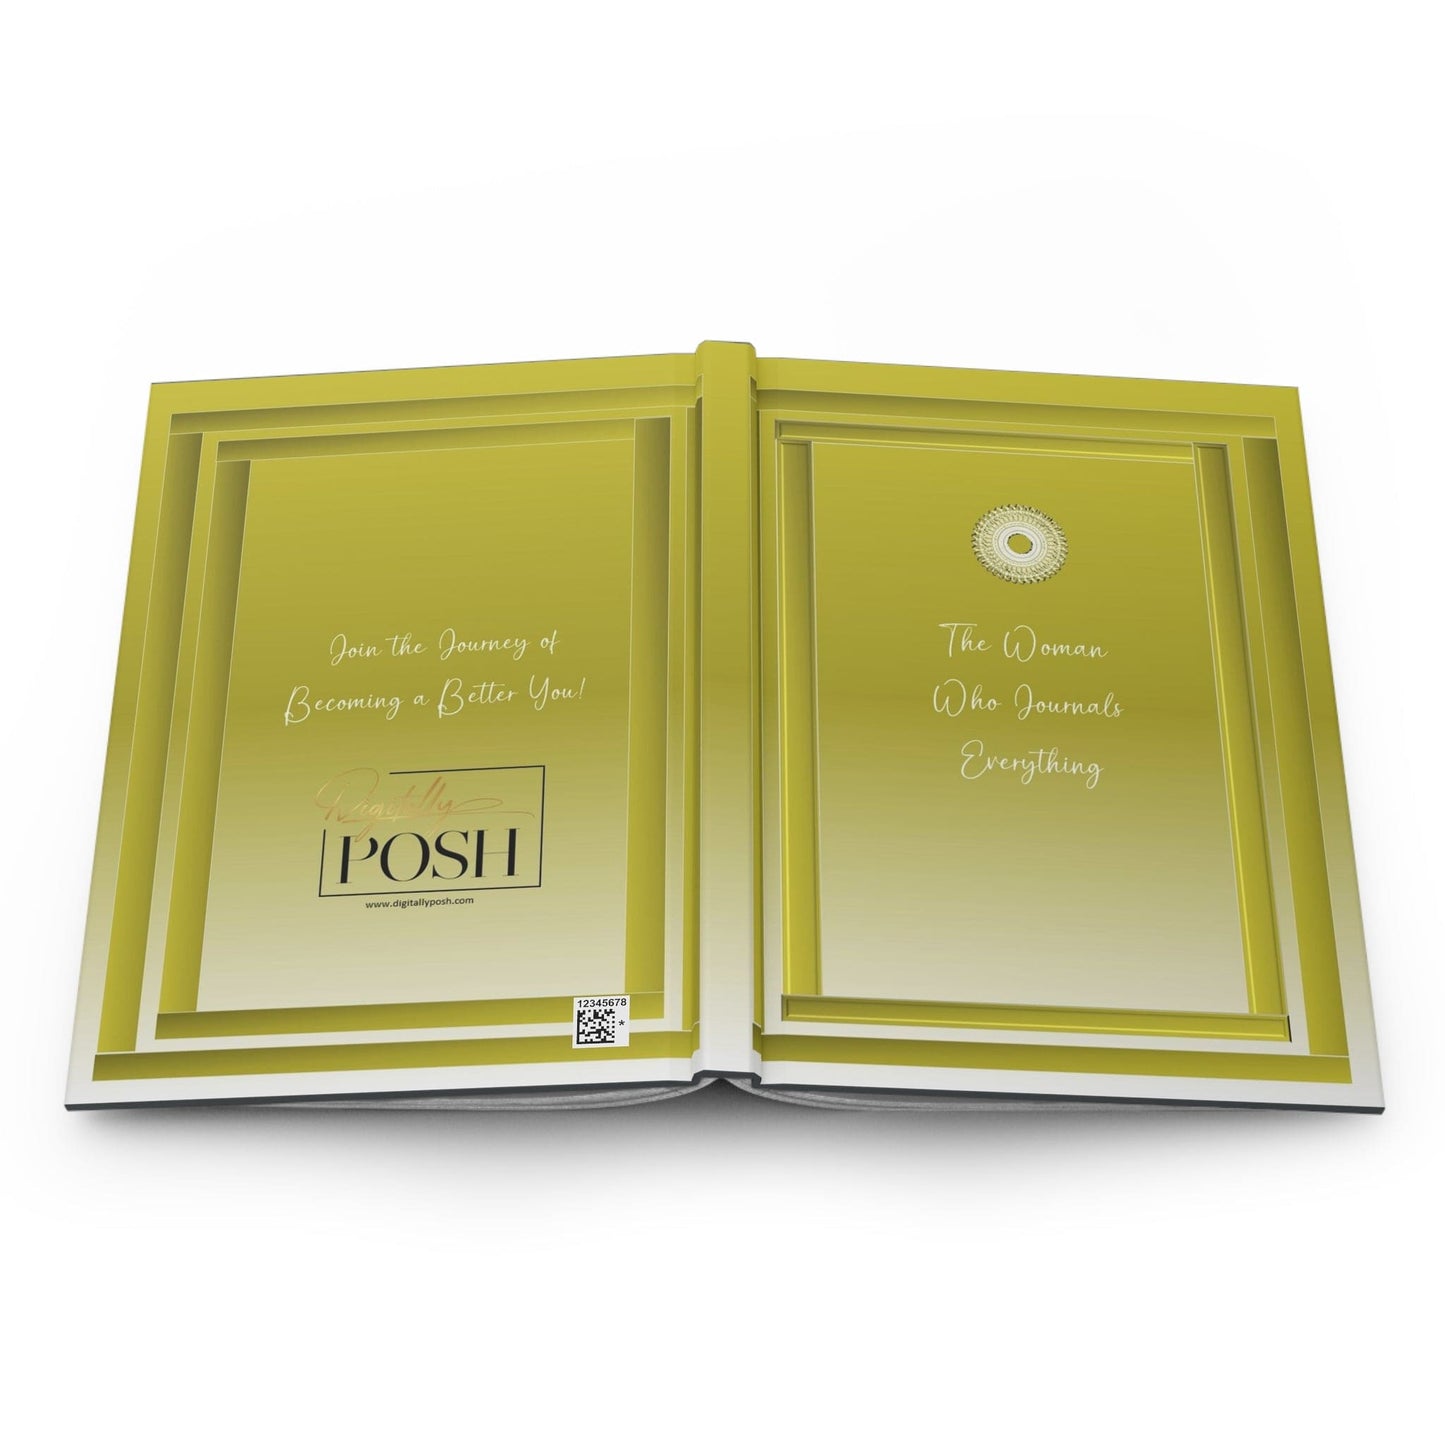 Personalized Journal: Capture Memories and Express Yourself with Customized Journaling. The Woman Who Journals Everything